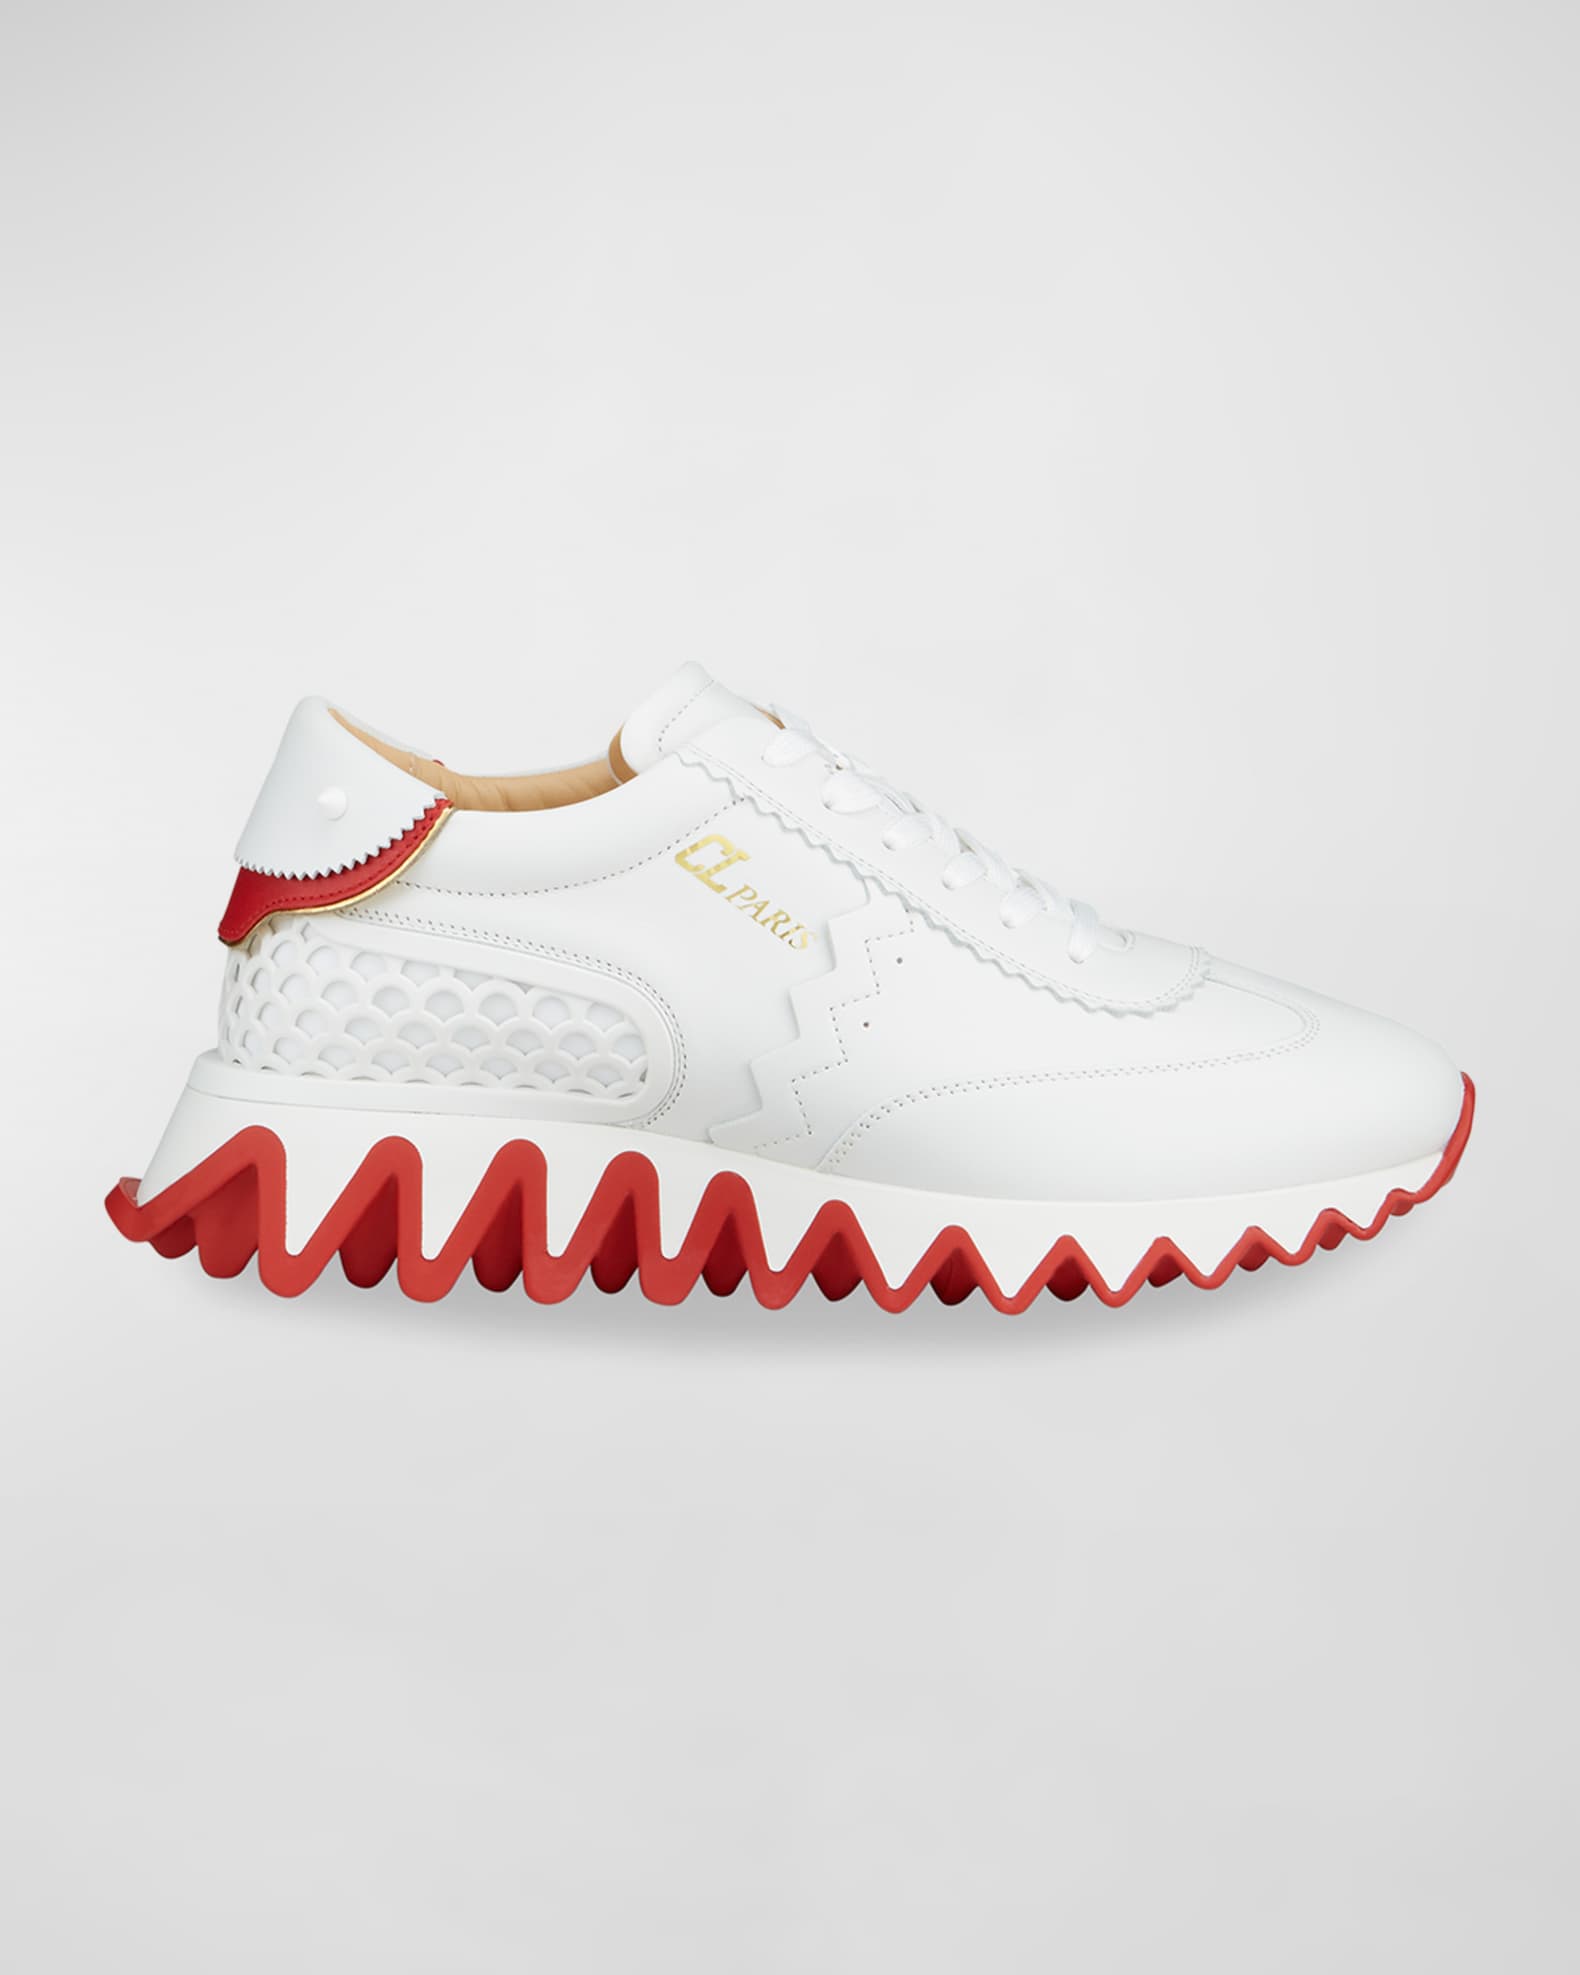 Christian Louboutin Loubishark Donna Red Sole Runner Sneakers Neiman Marcus